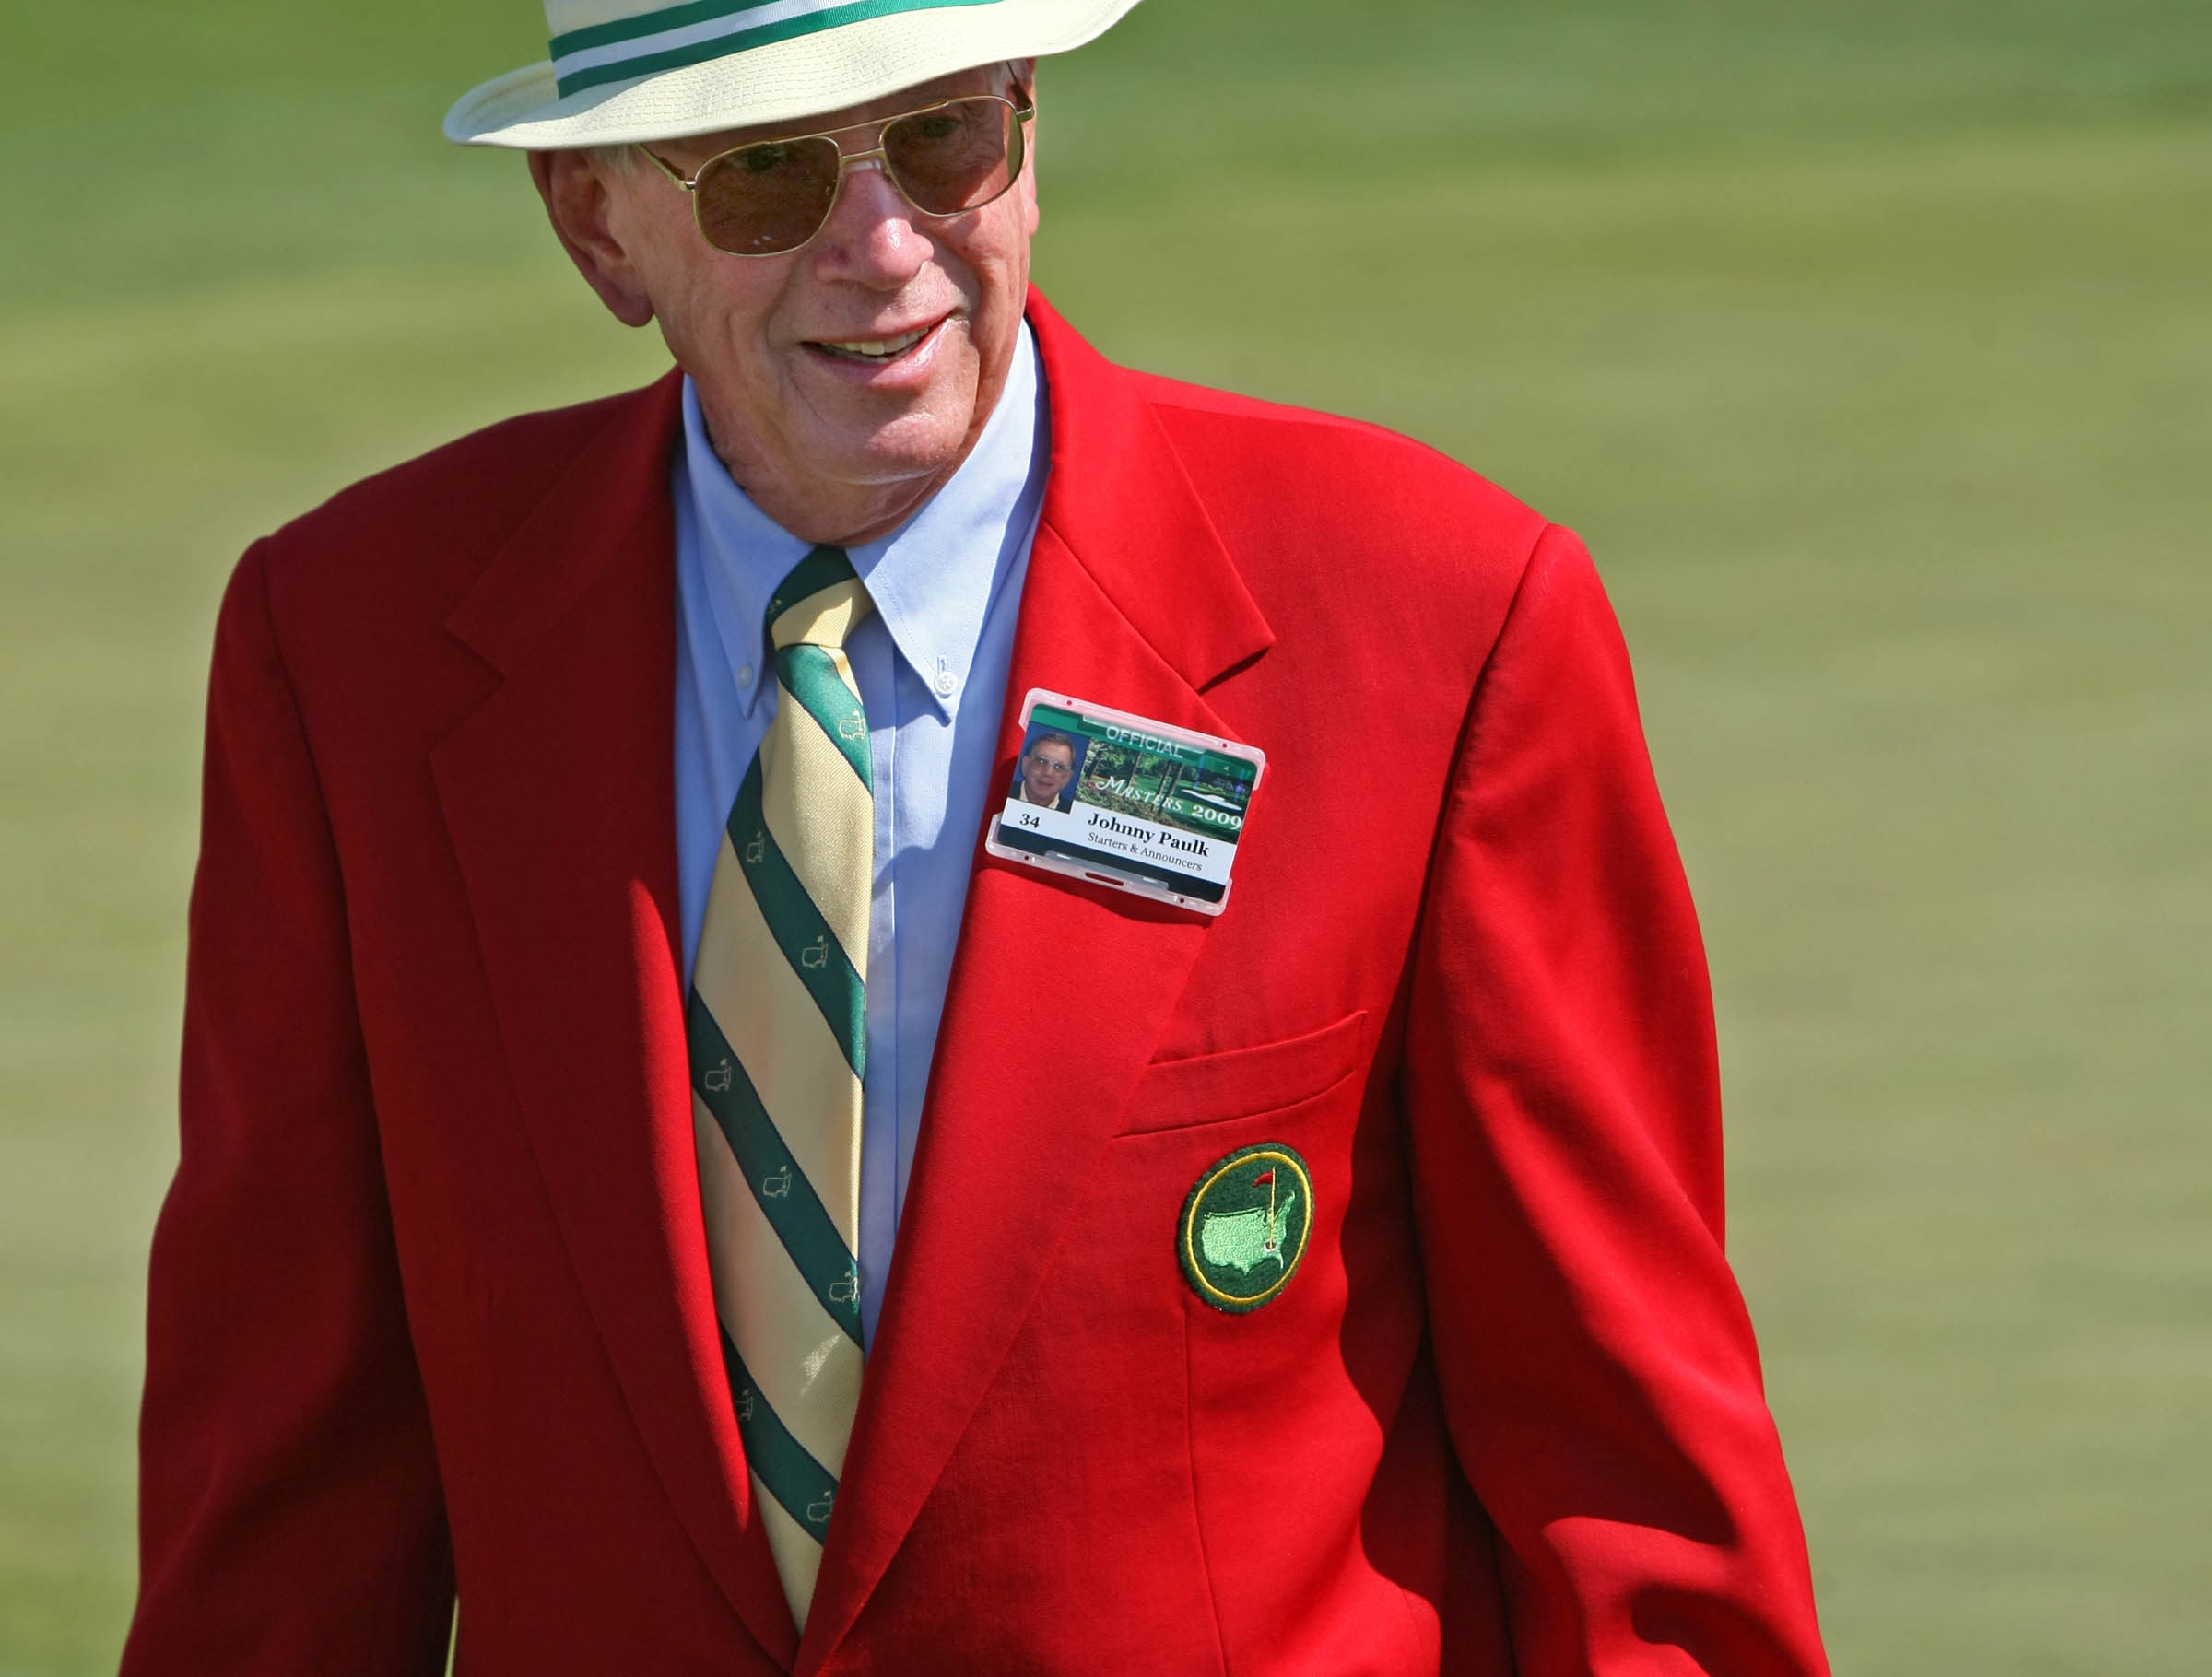 Paulk was a fixture for years on Augusta National's 18th green during The Masters. (AP Photo)